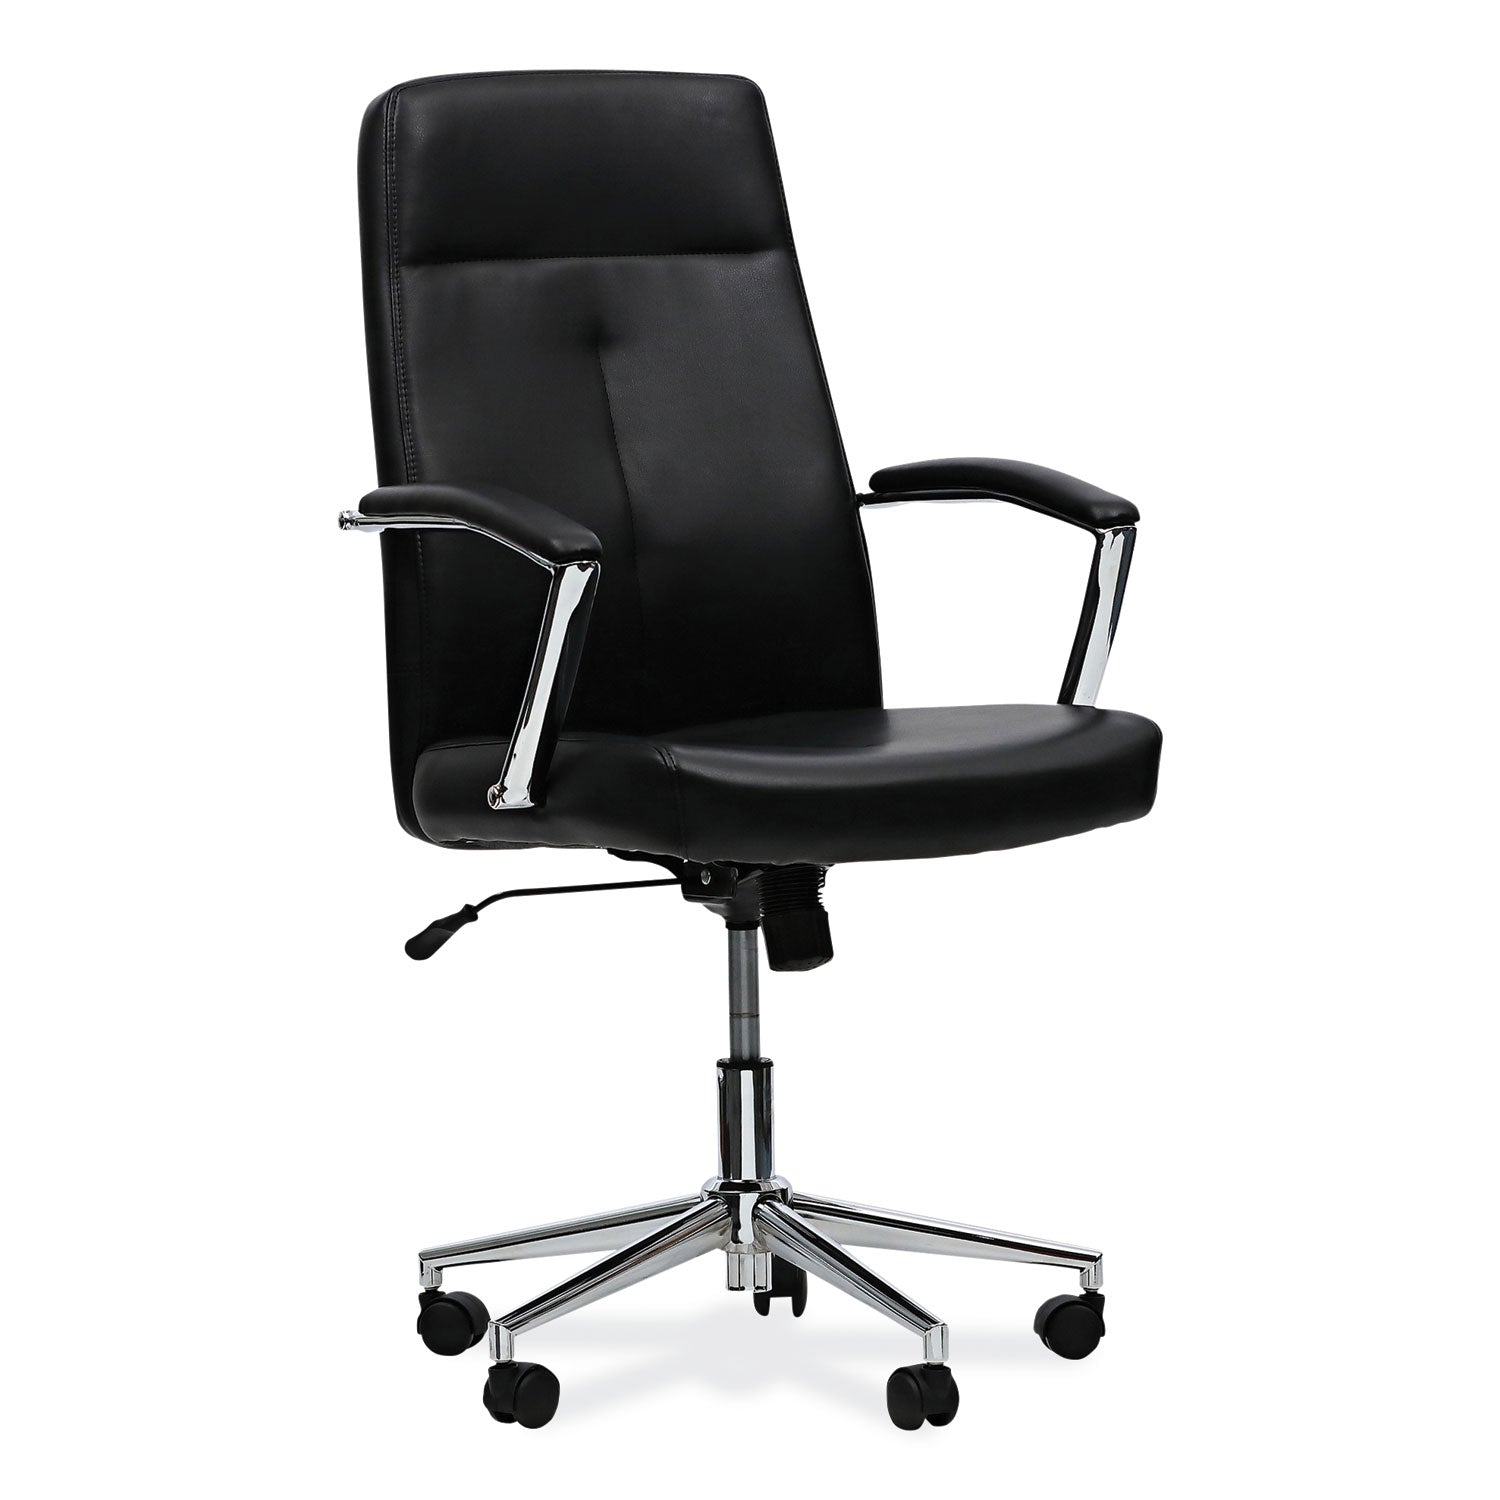 leather-task-chair-supports-up-to-275-lb-1819-to-2193-seat-height-black-seat-black-back_alews4116 - 1